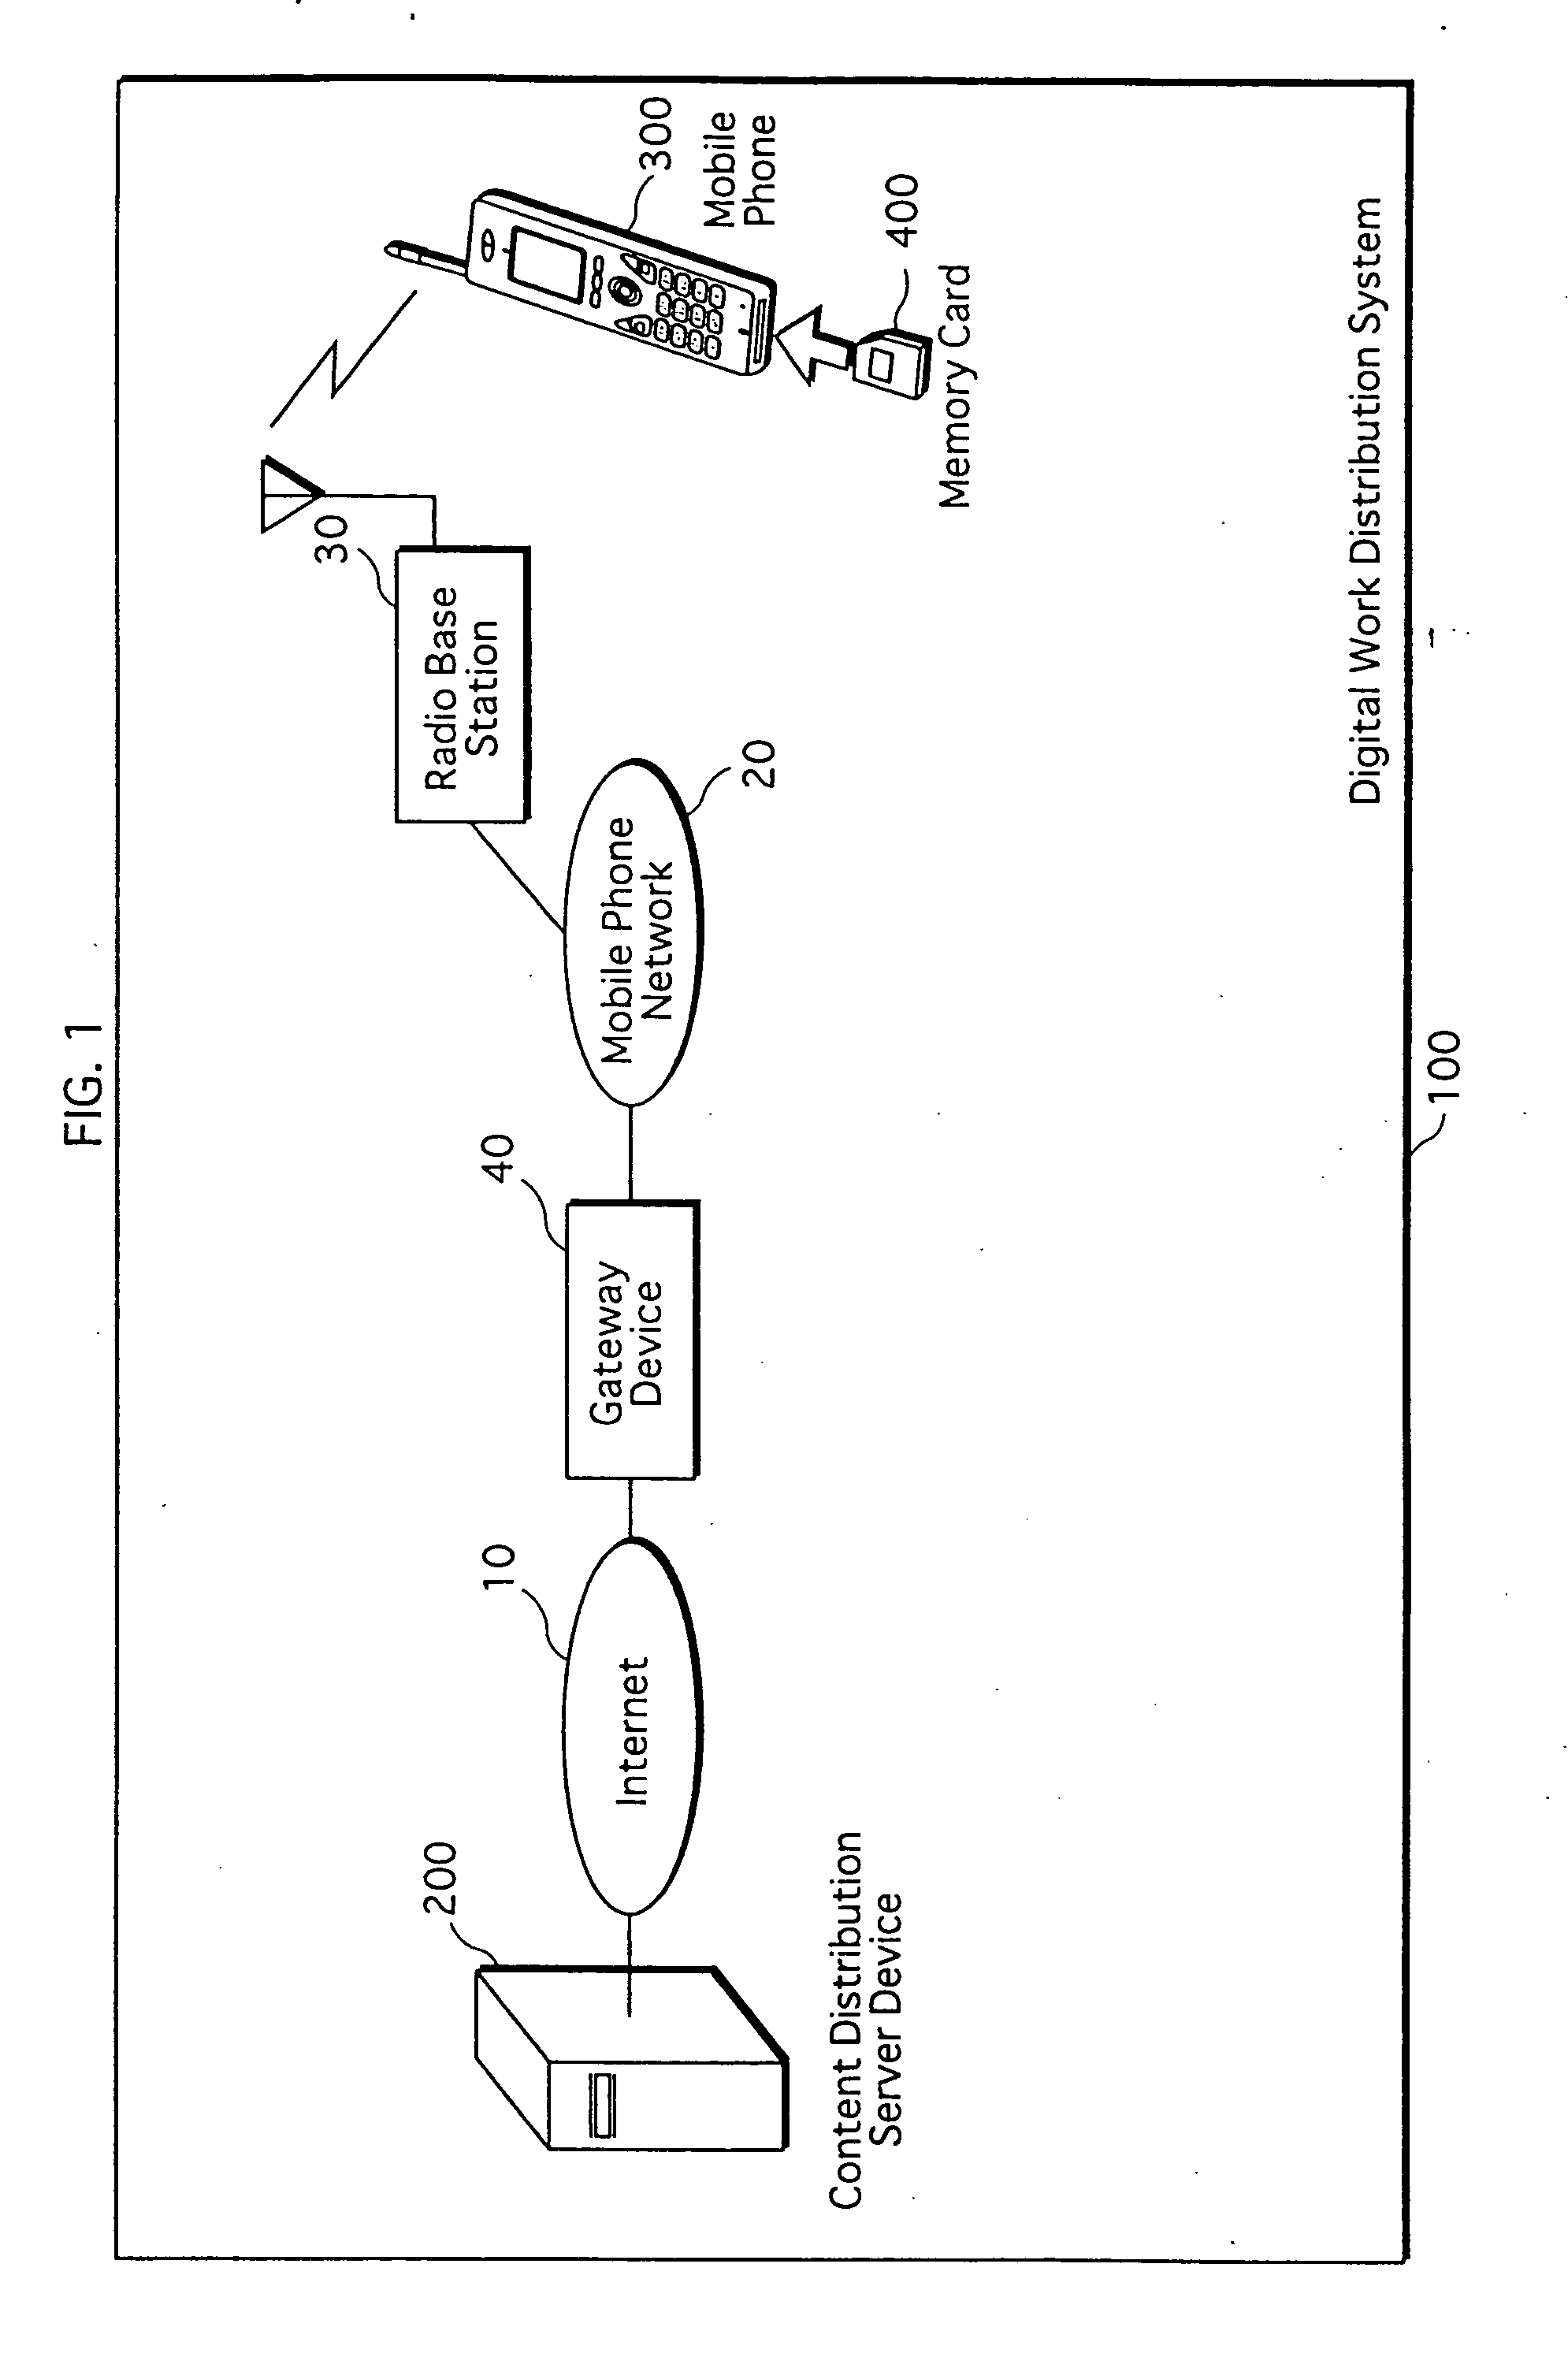 Digital work protection system, record/ playback device, recording medium device, and model change device